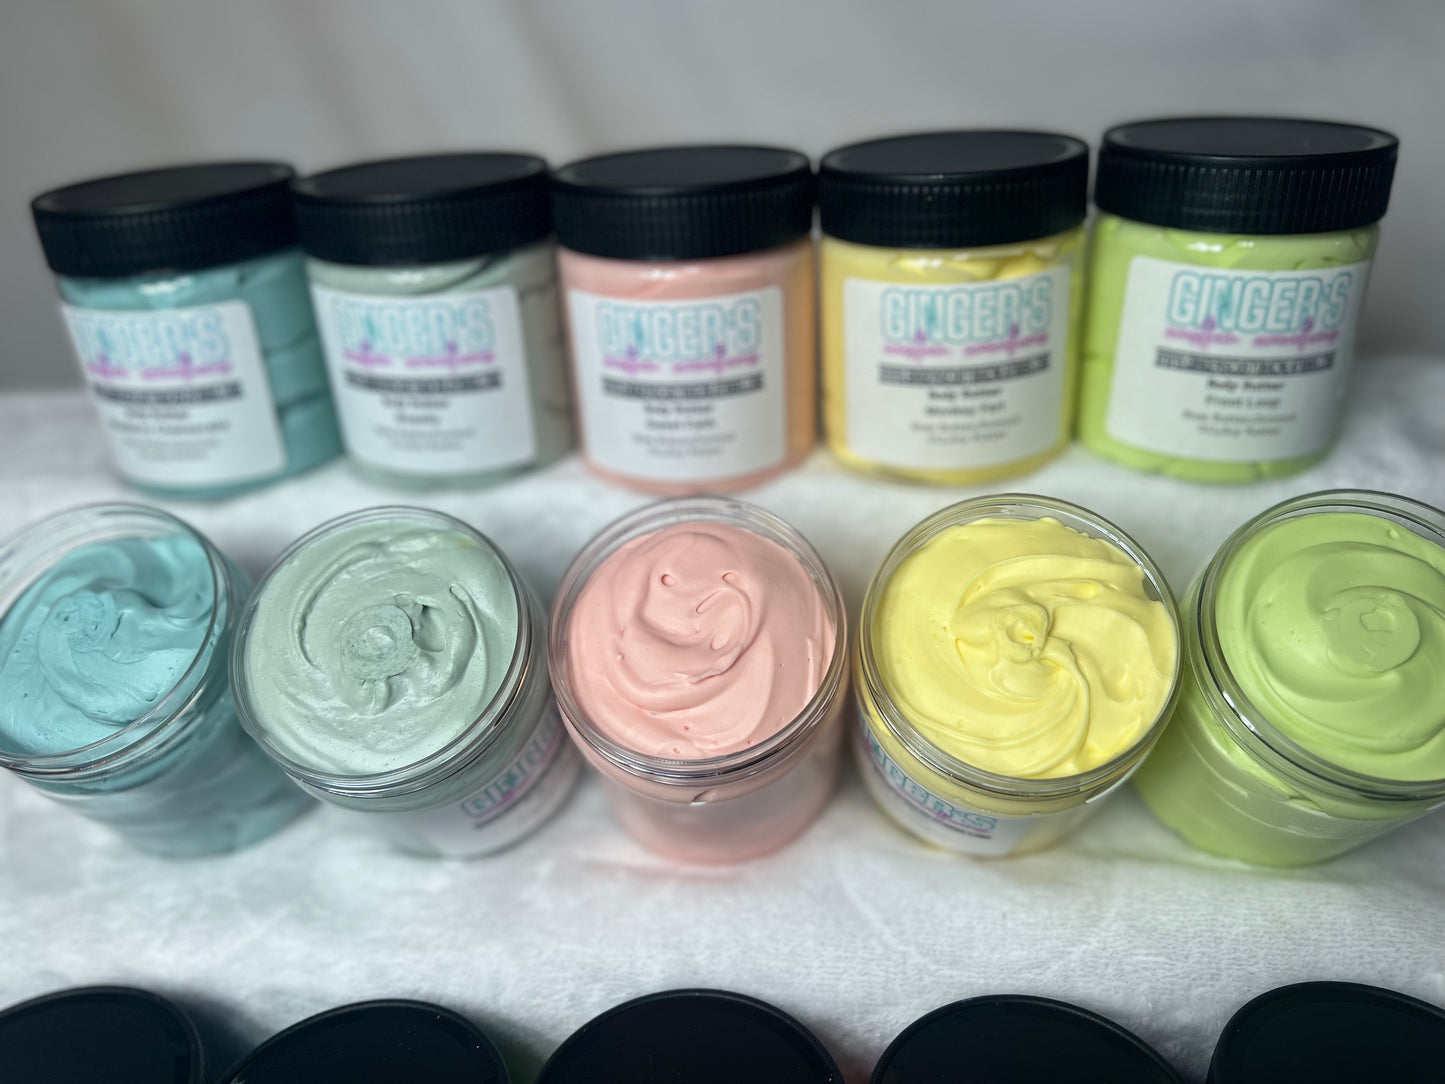 MADE-TO-ORDER BODY BUTTER - turnaround time is 7-9 days.